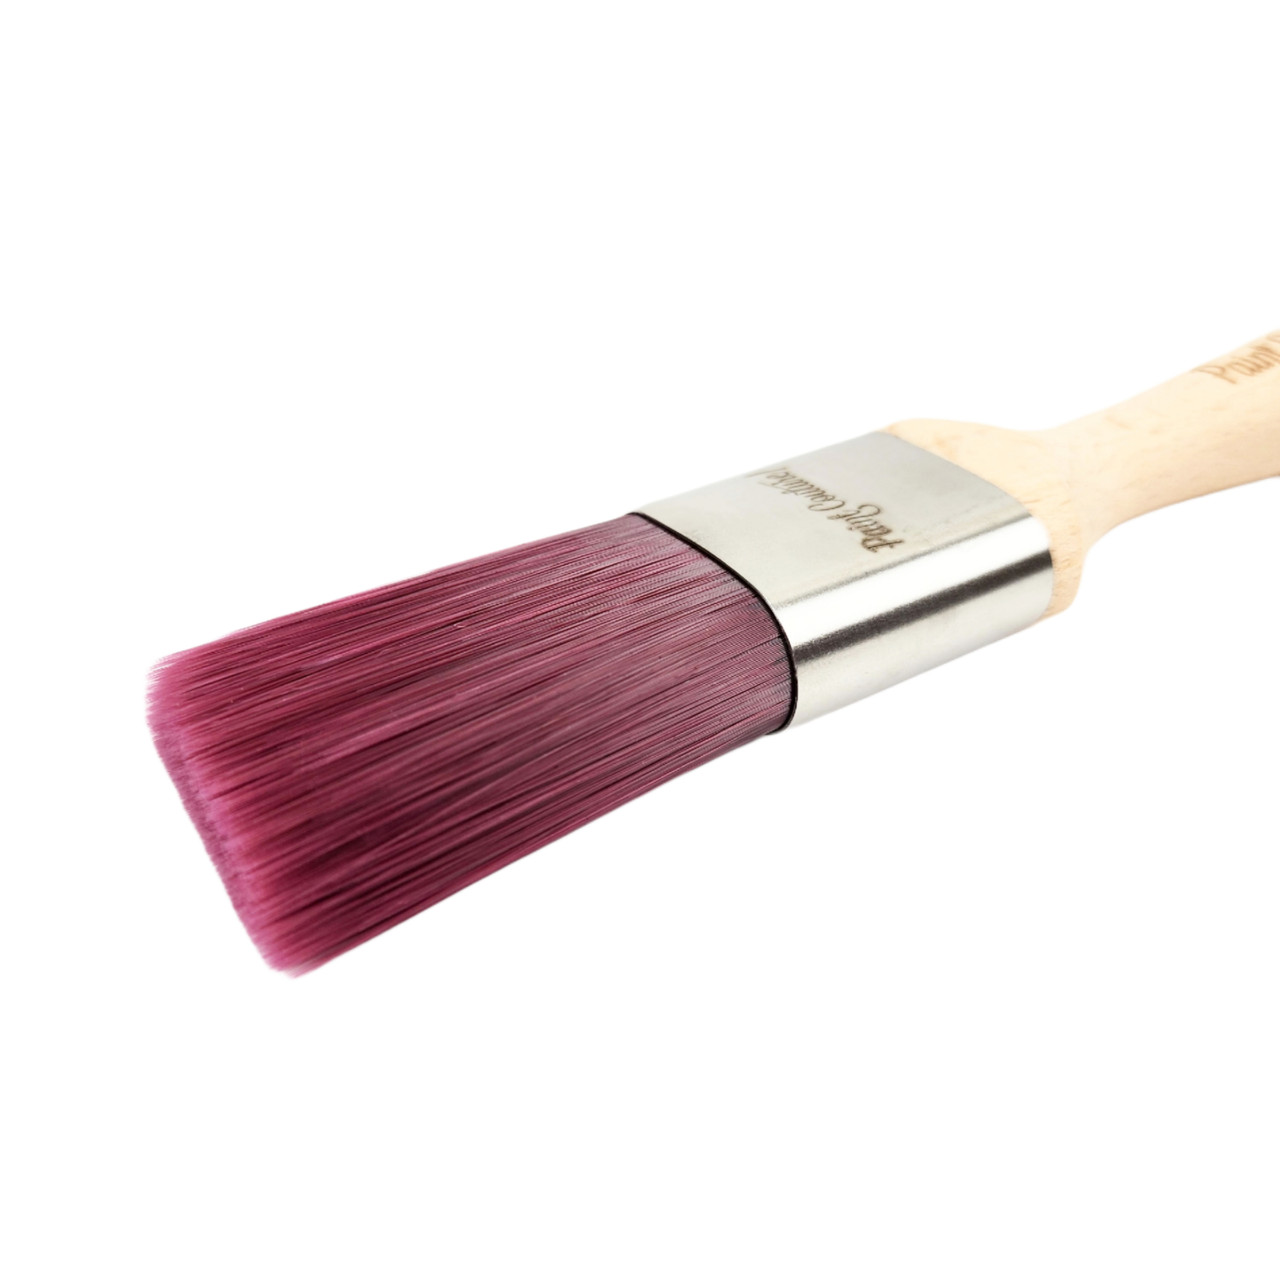 1.5 Flat Fine Synthetic Paint Brush by Paint Couture pcfspb1